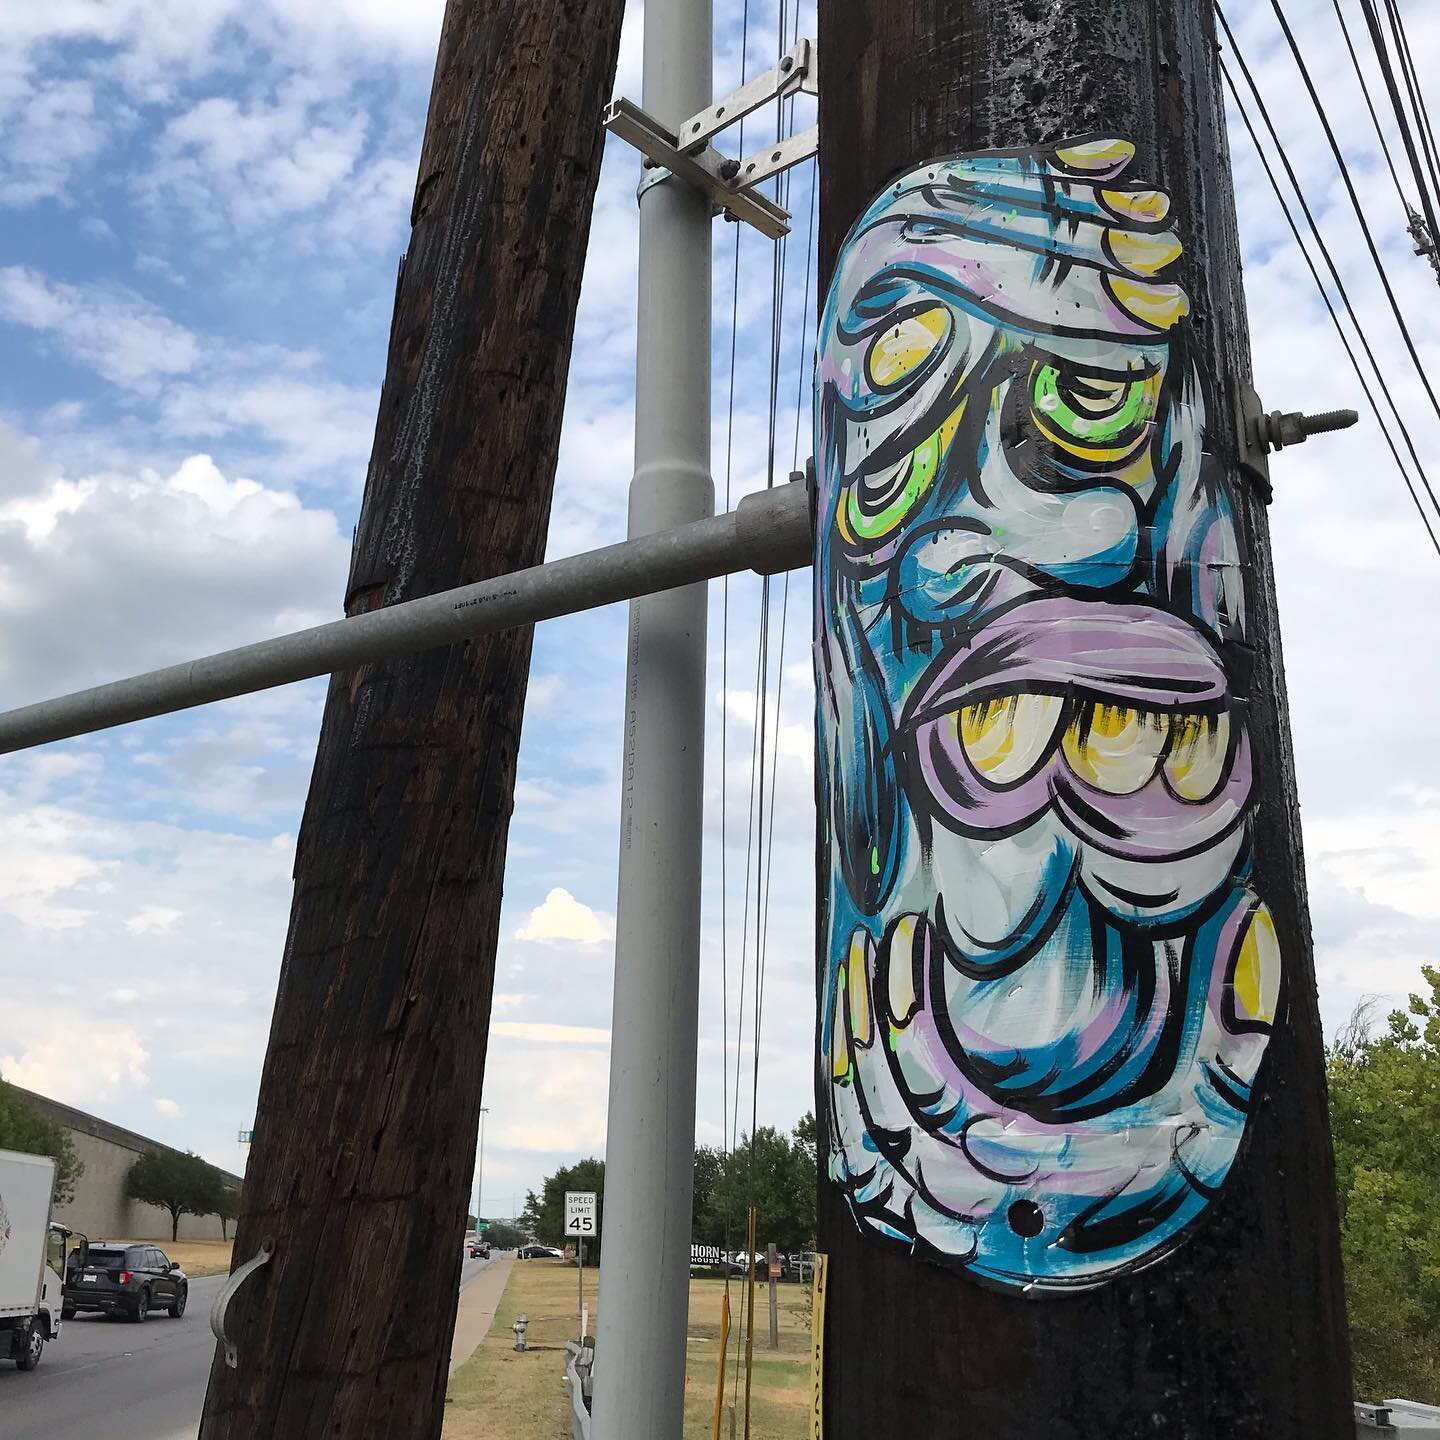 The thinker, but with a metal bolt through the brain.
#angryclouds⛈ #angrycloud #austin #atx #texas #art #streetart #character #painting #drawing #painting #recycle #creativereuse #artistsoninstagram #artistsofinstagram